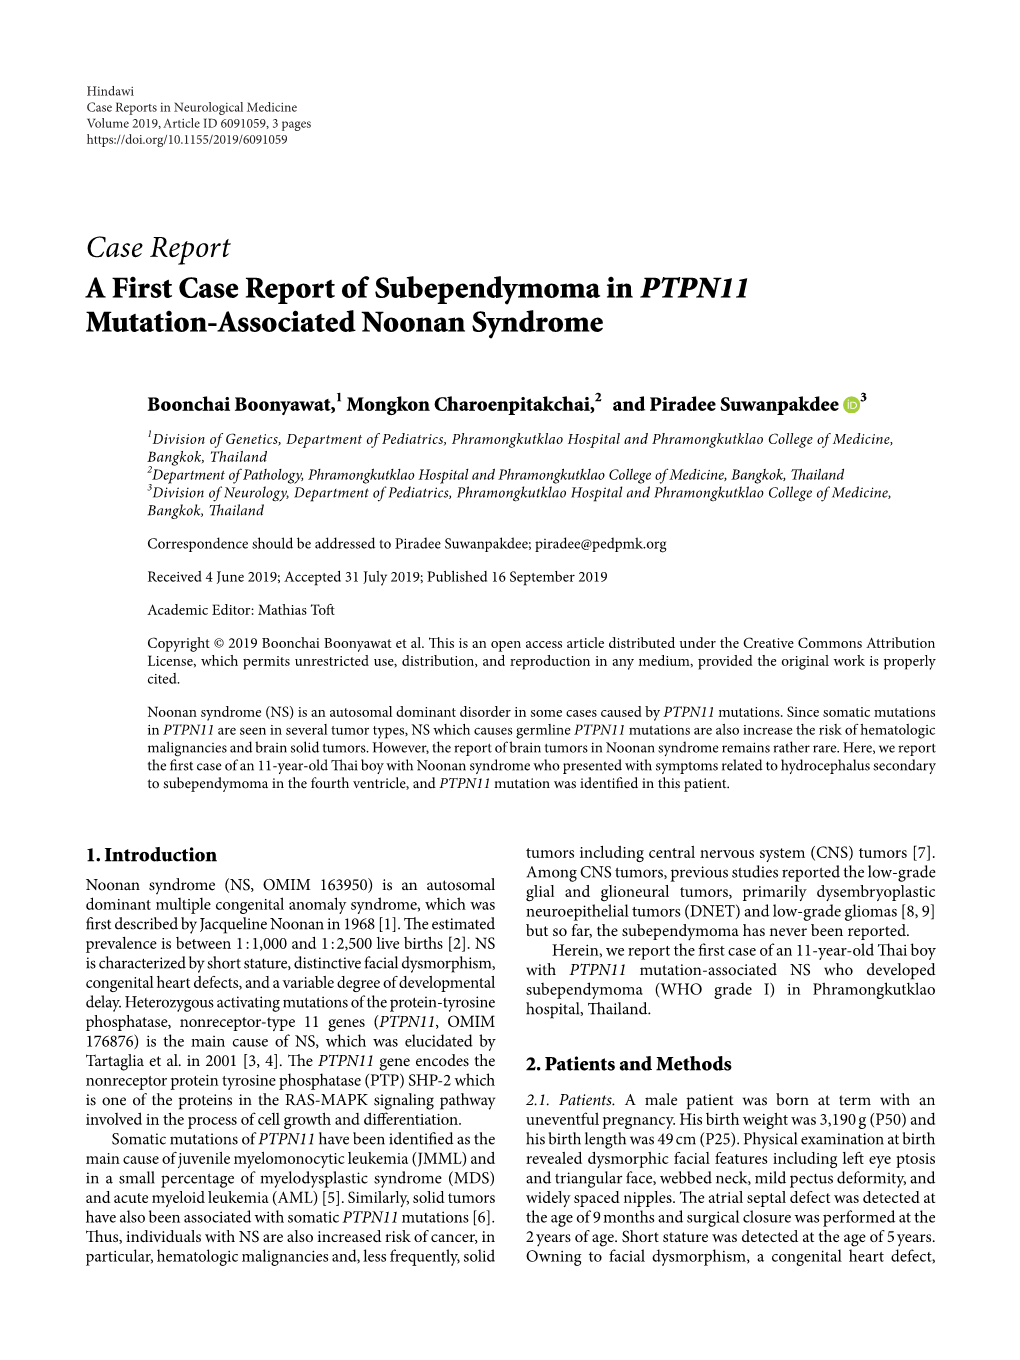 Case Report a First Case Report of Subependymoma in PTPN11 Mutation-Associated Noonan Syndrome